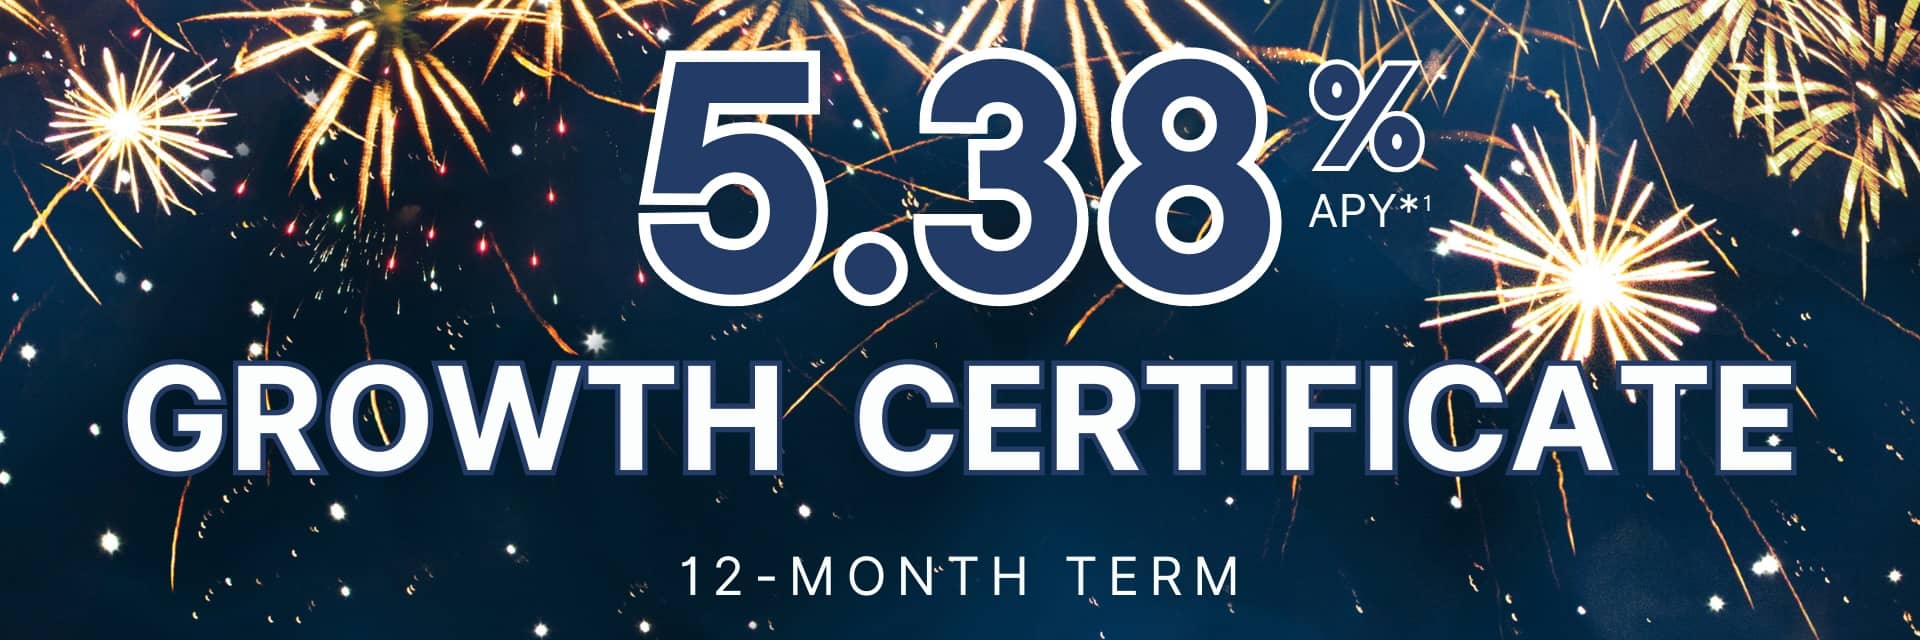 5.38% Growth Certificate